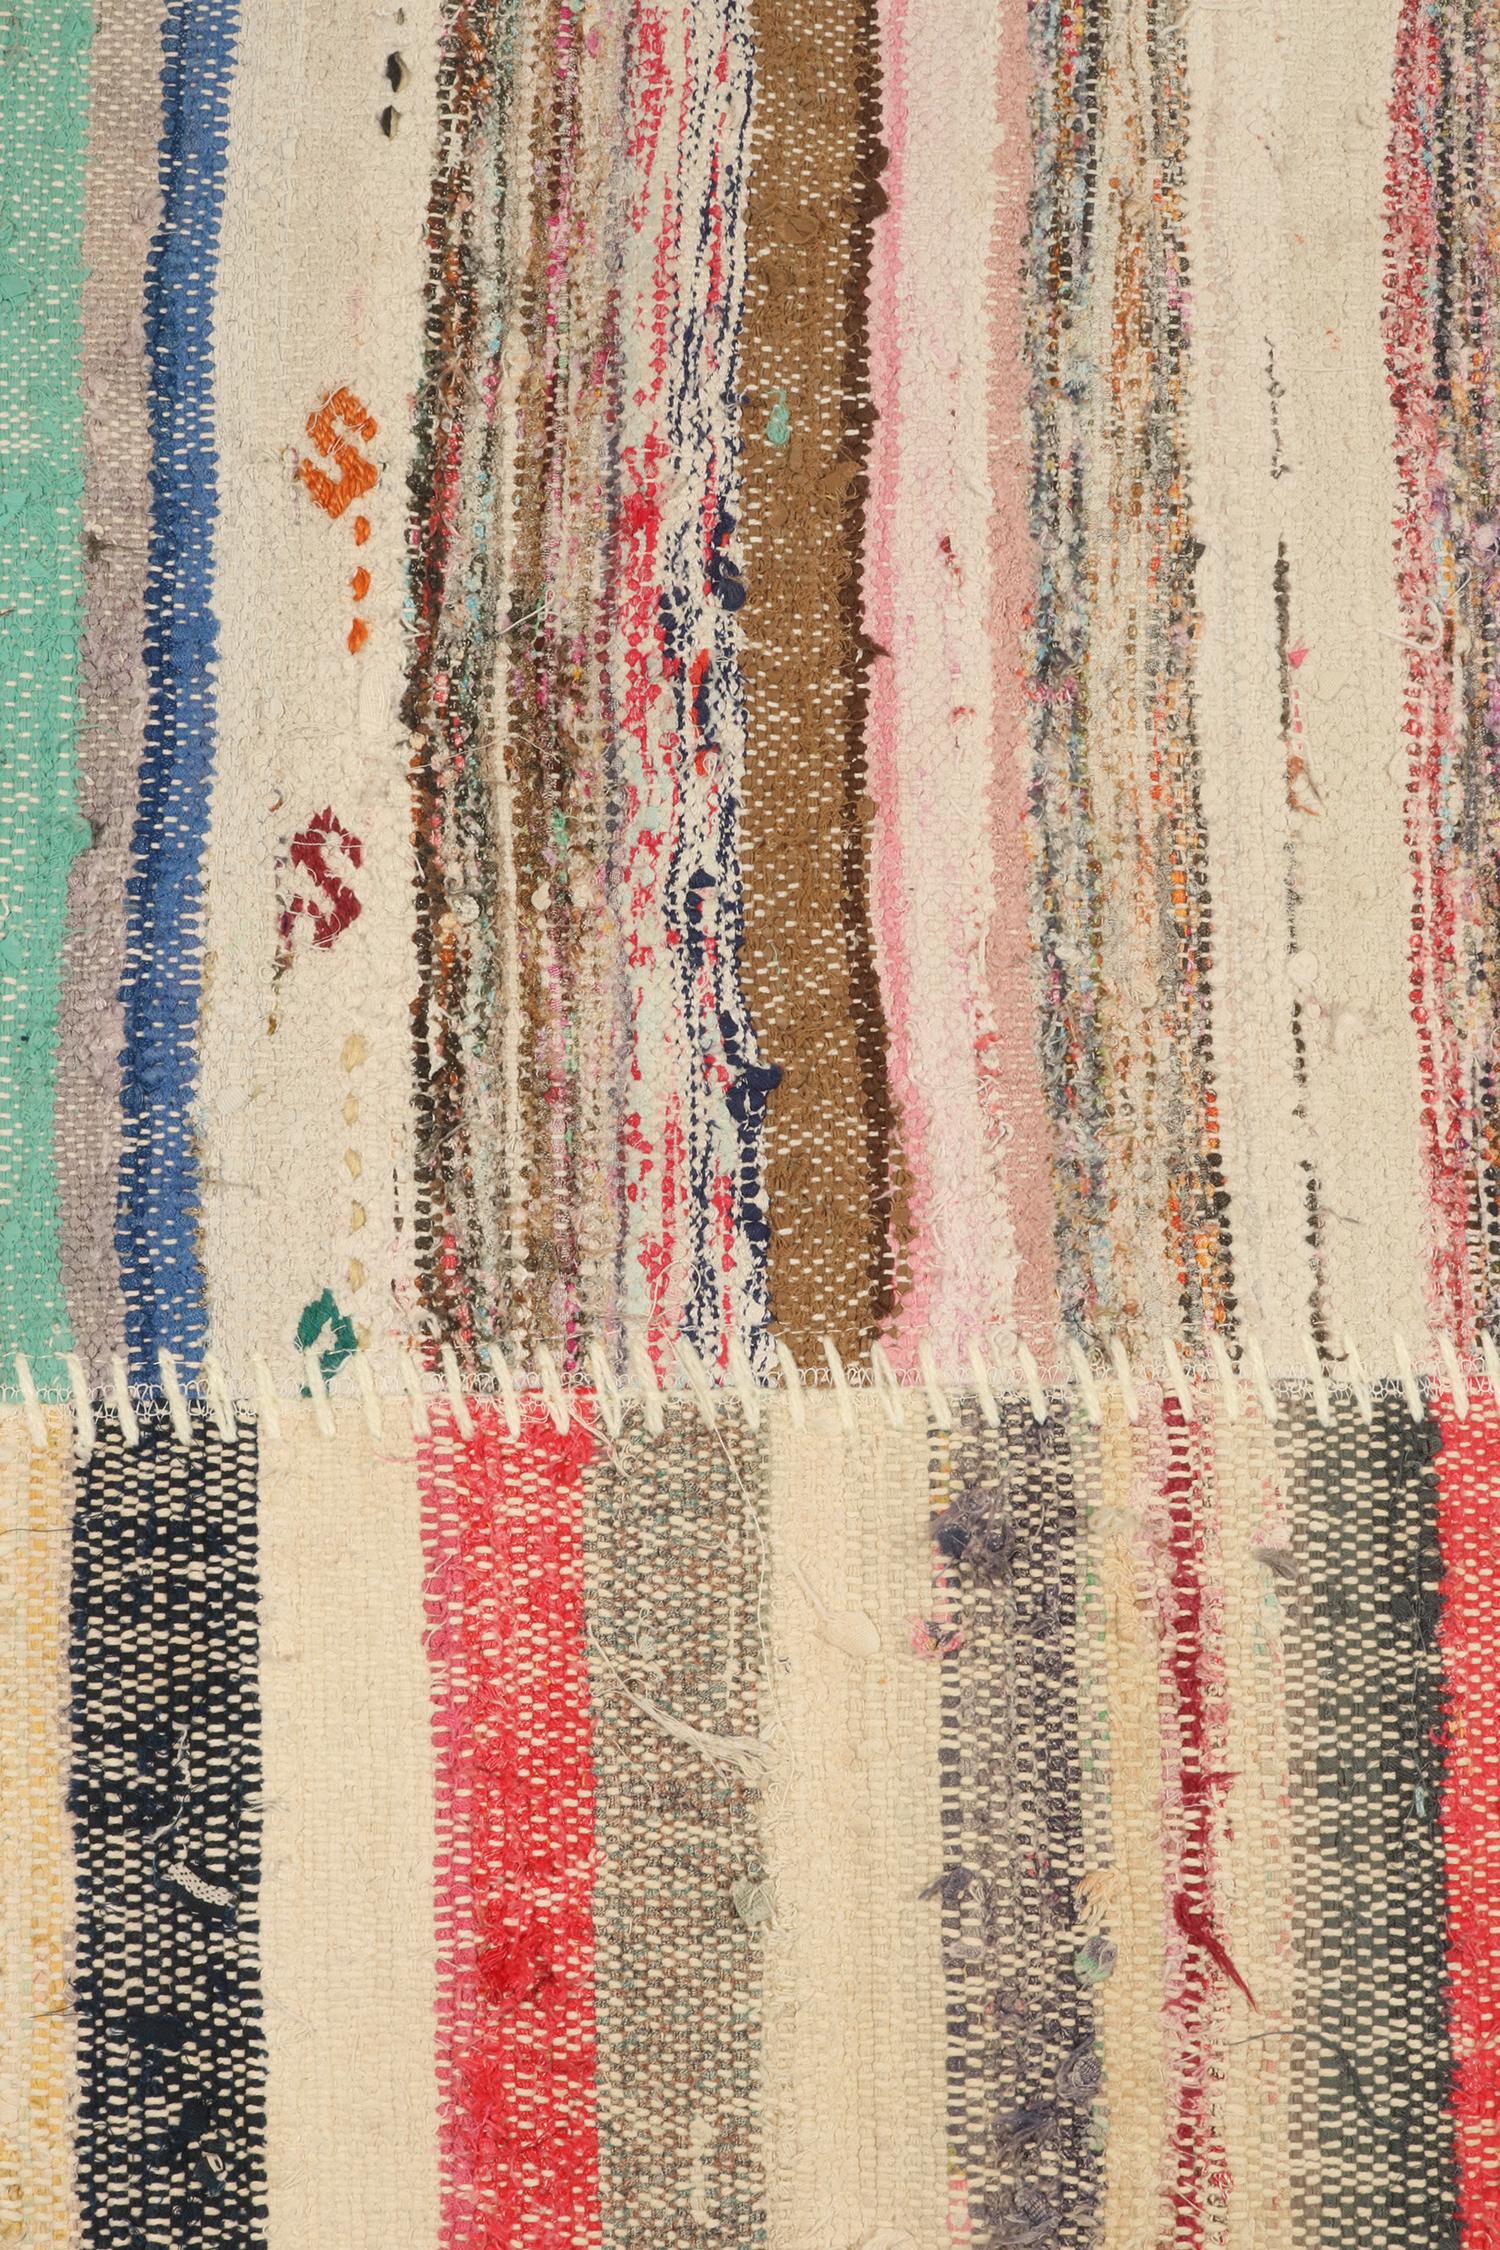 Rug & Kilim’s Patchwork Kilim Square Rug in Polychromatic Stripes In New Condition For Sale In Long Island City, NY